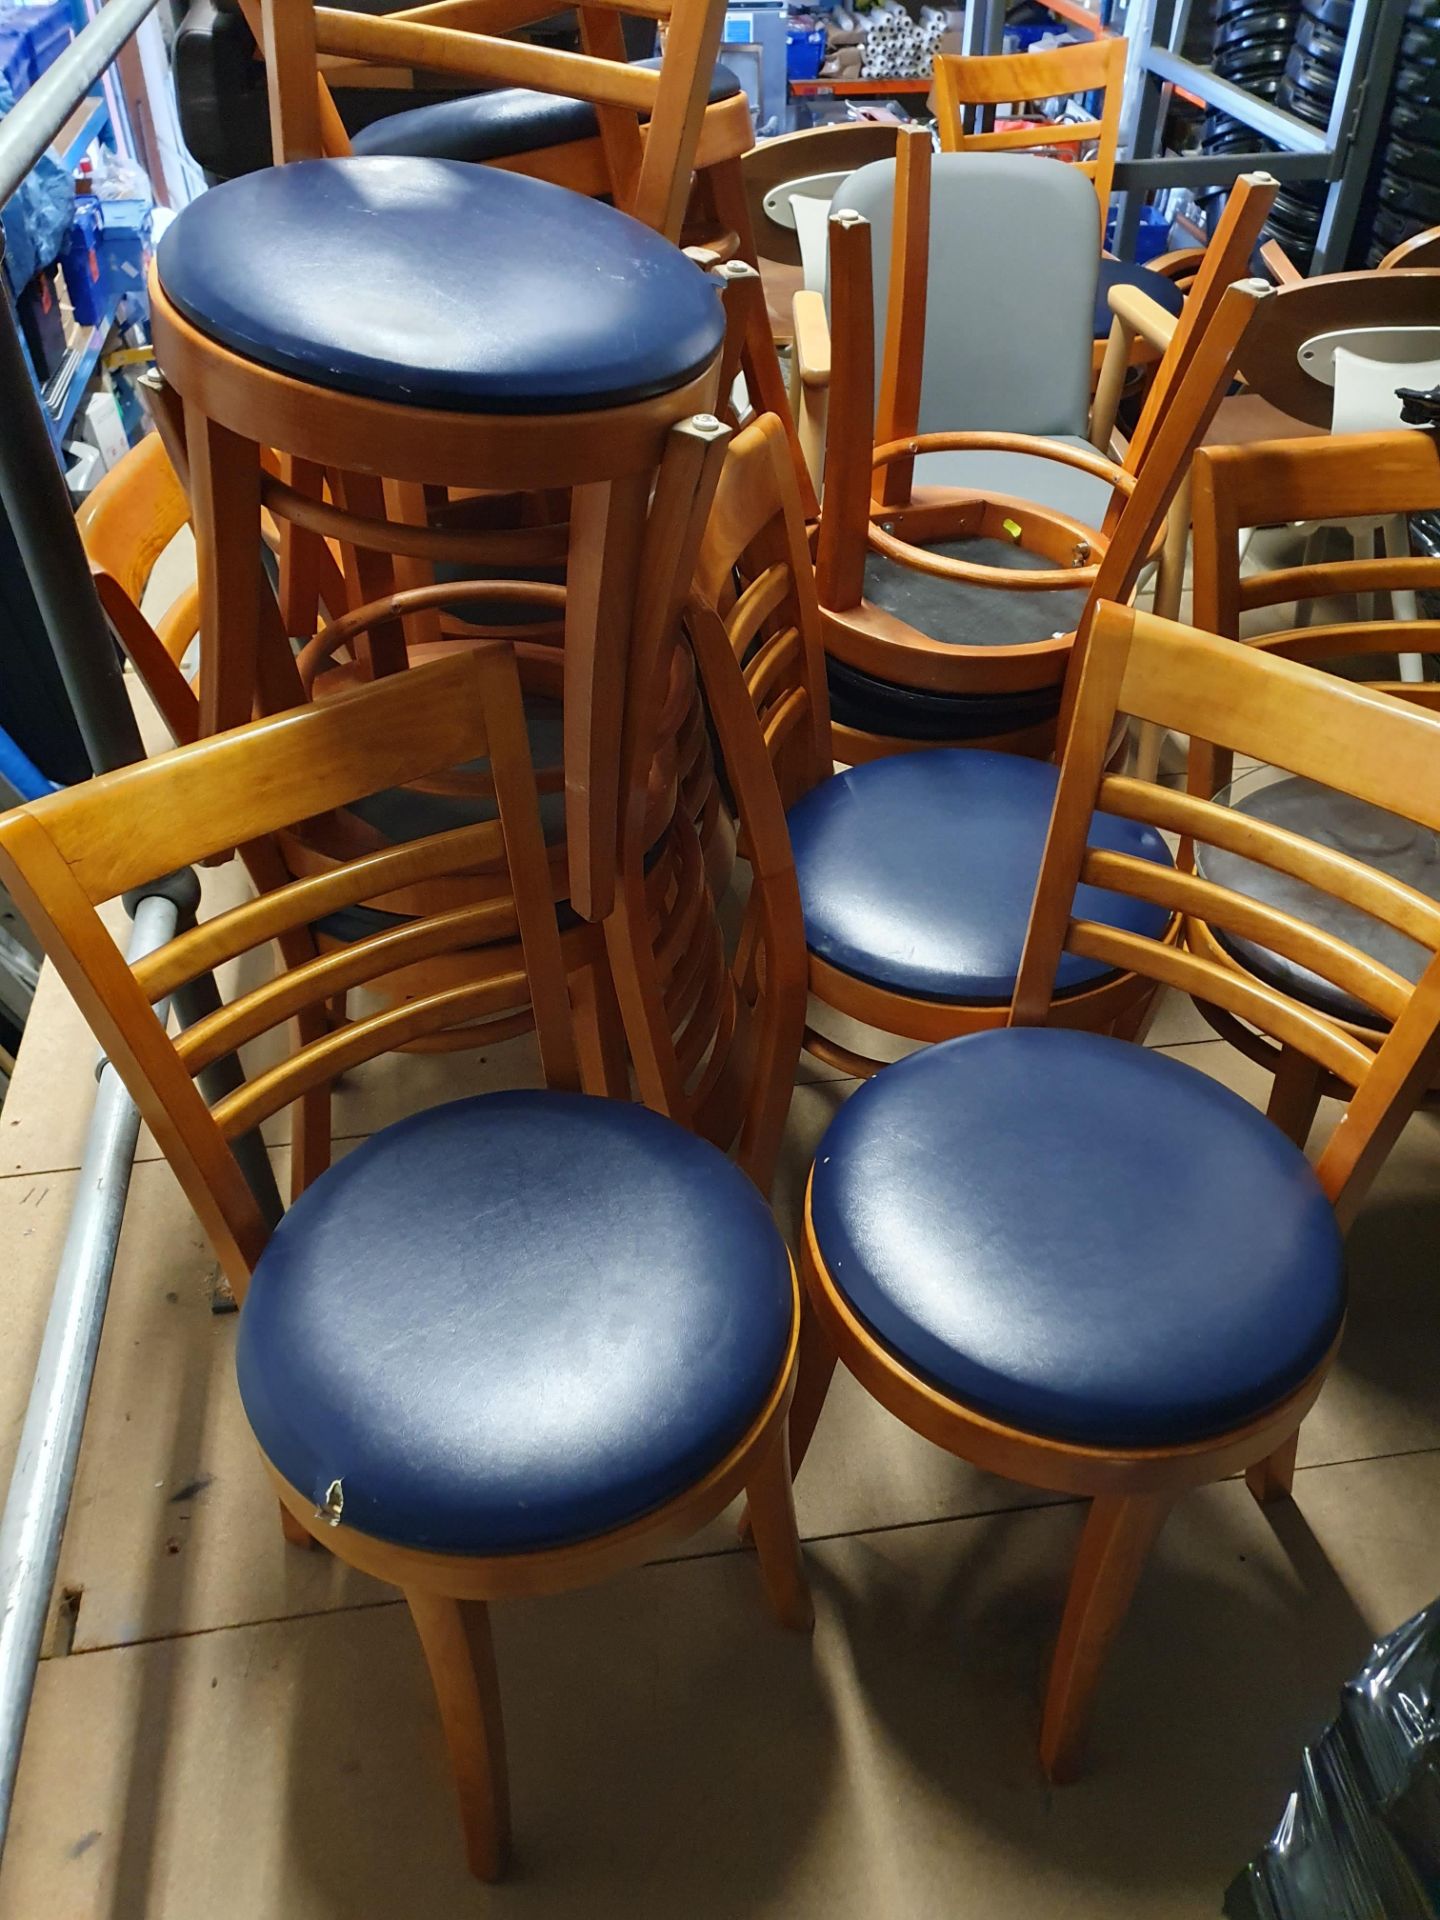 * 14 x chairs with navy seat pads